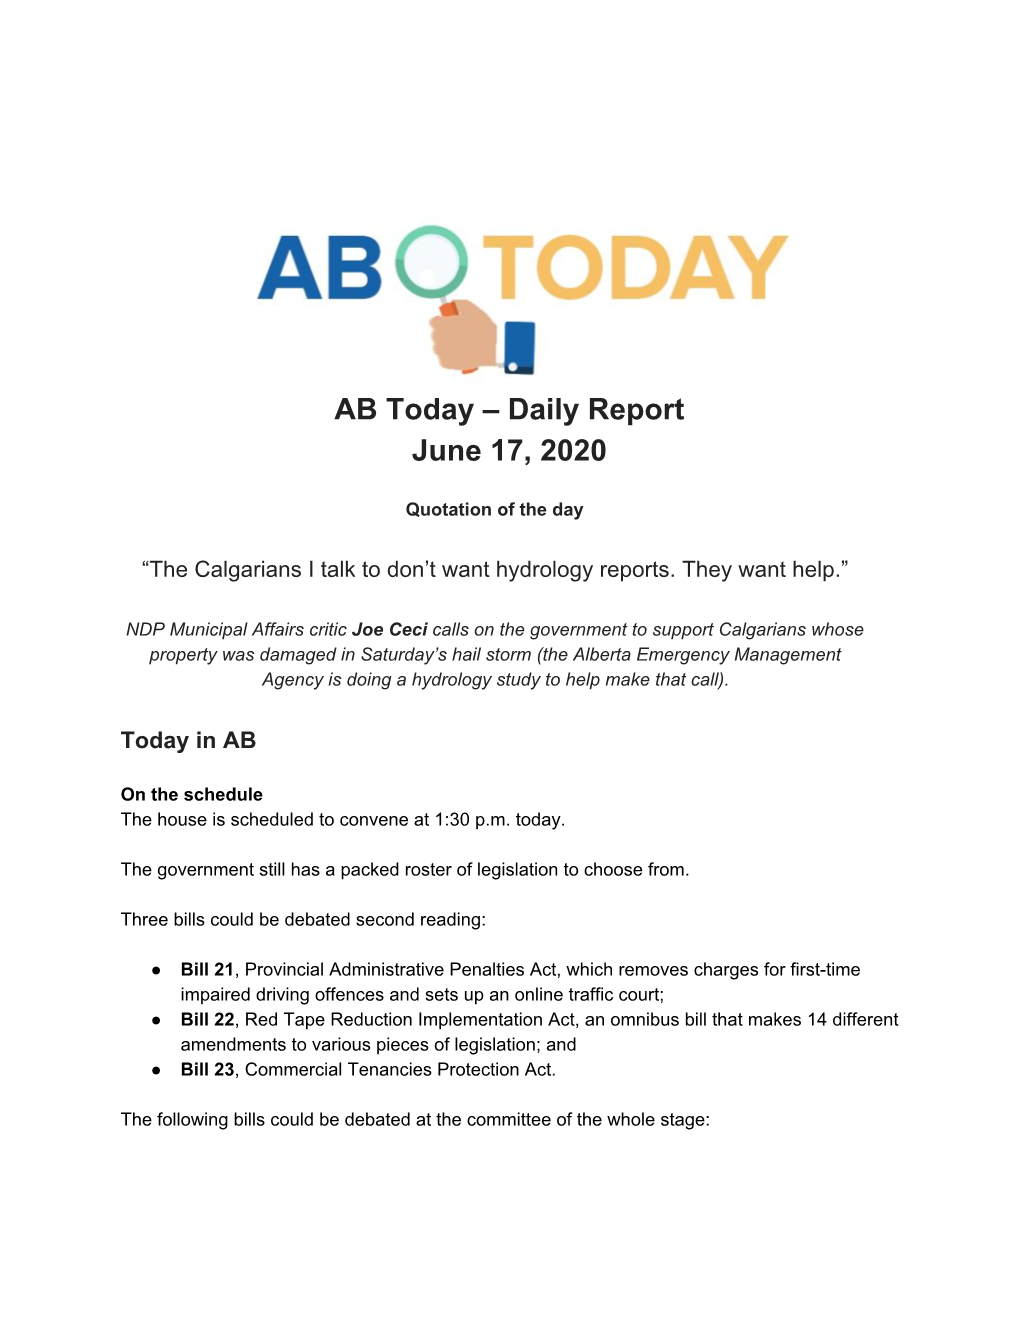 AB Today – Daily Report June 17, 2020